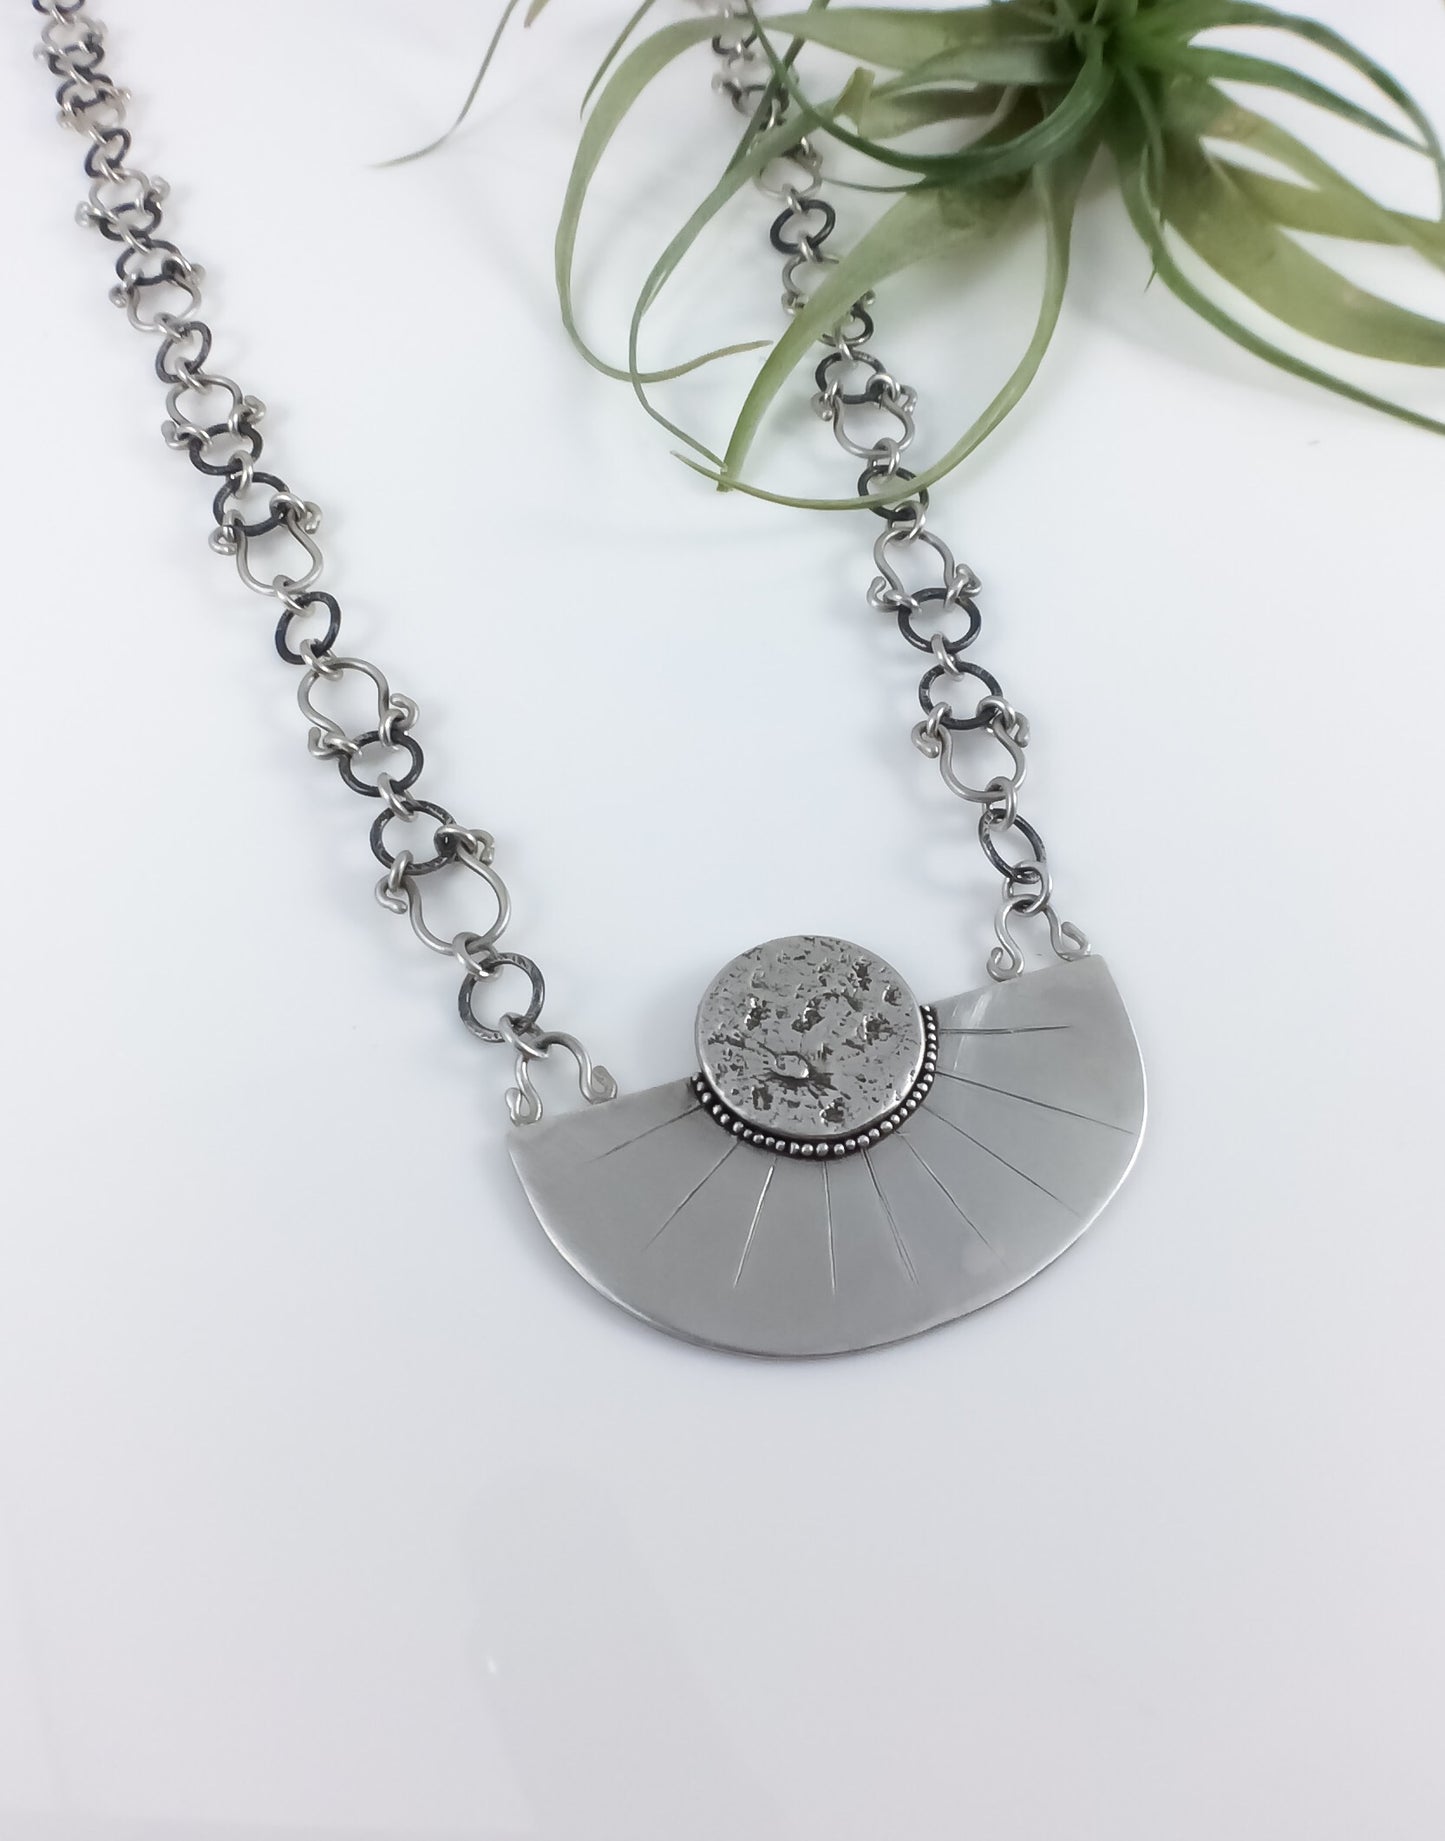 Bad Moon on the Rise Necklace